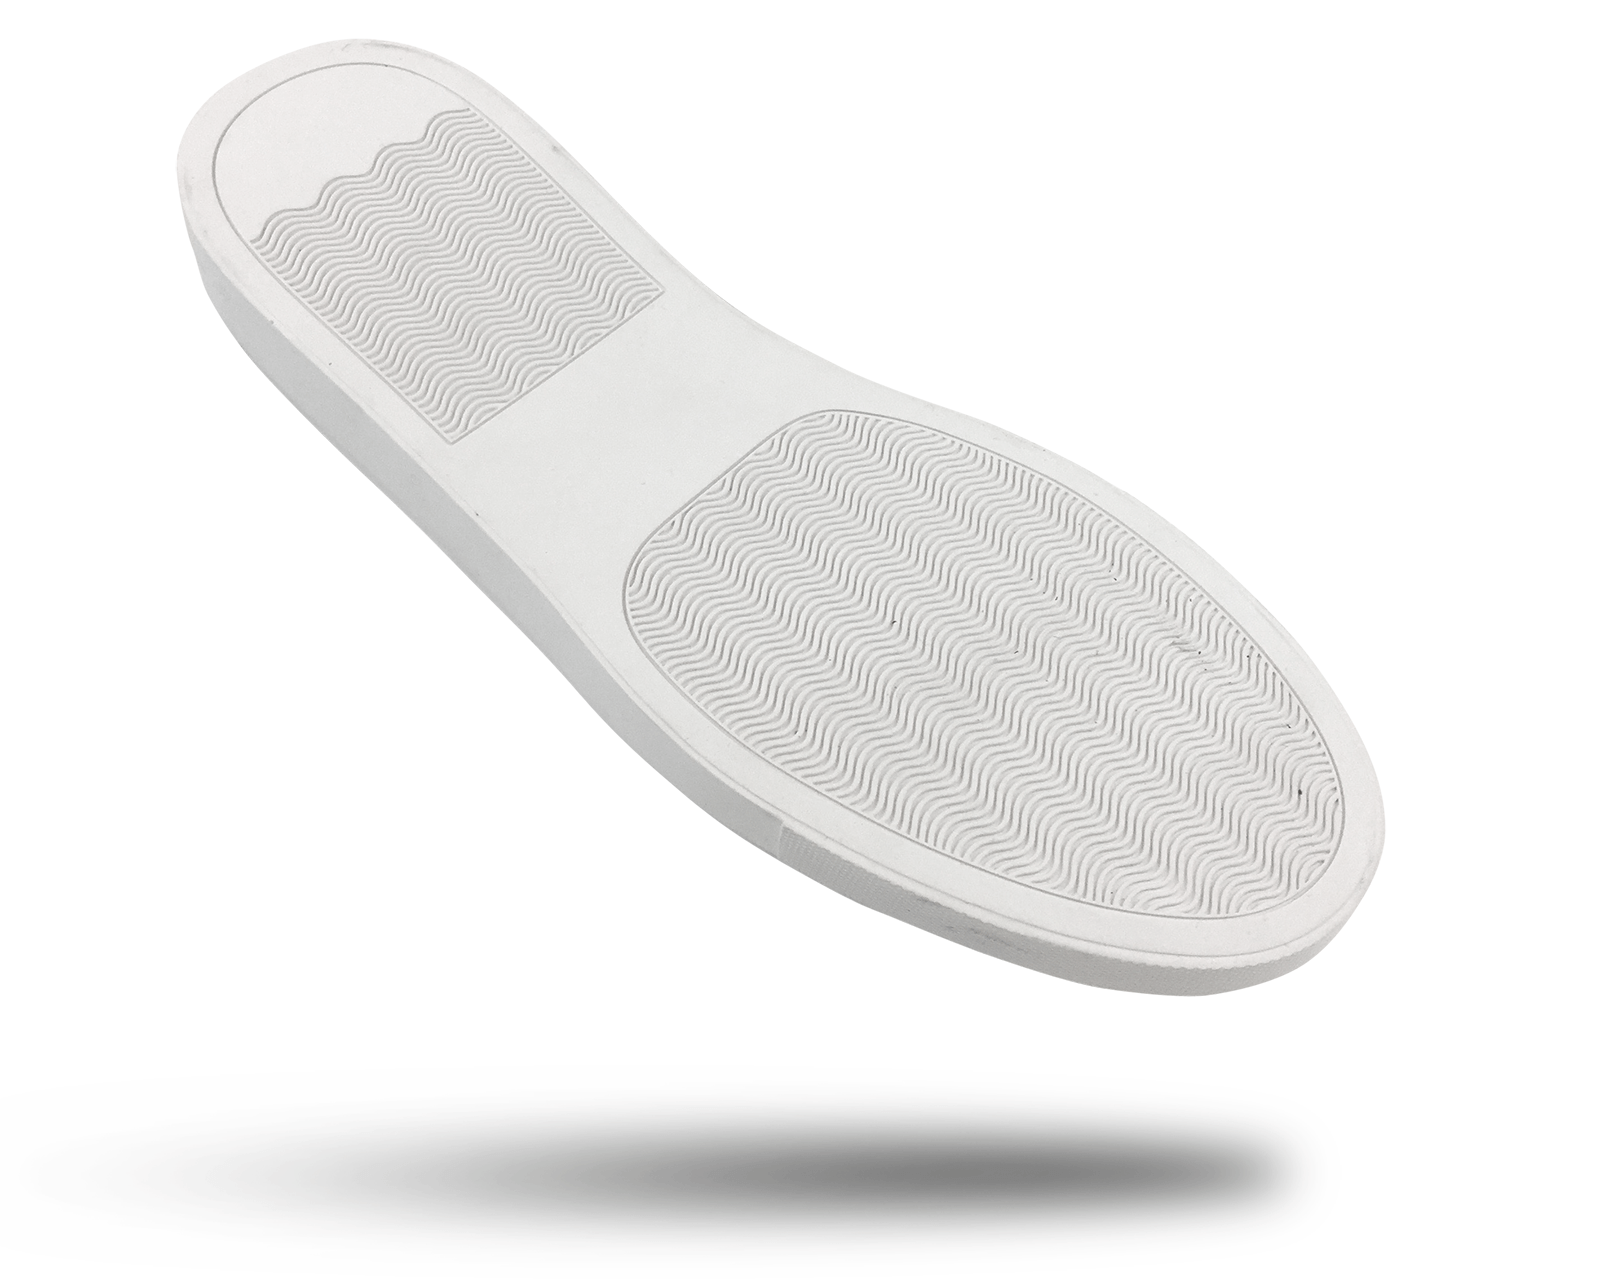 Rubber cupsole outsole Faux vulcanized Margom styling. Egg crate cushioning. DIY resole